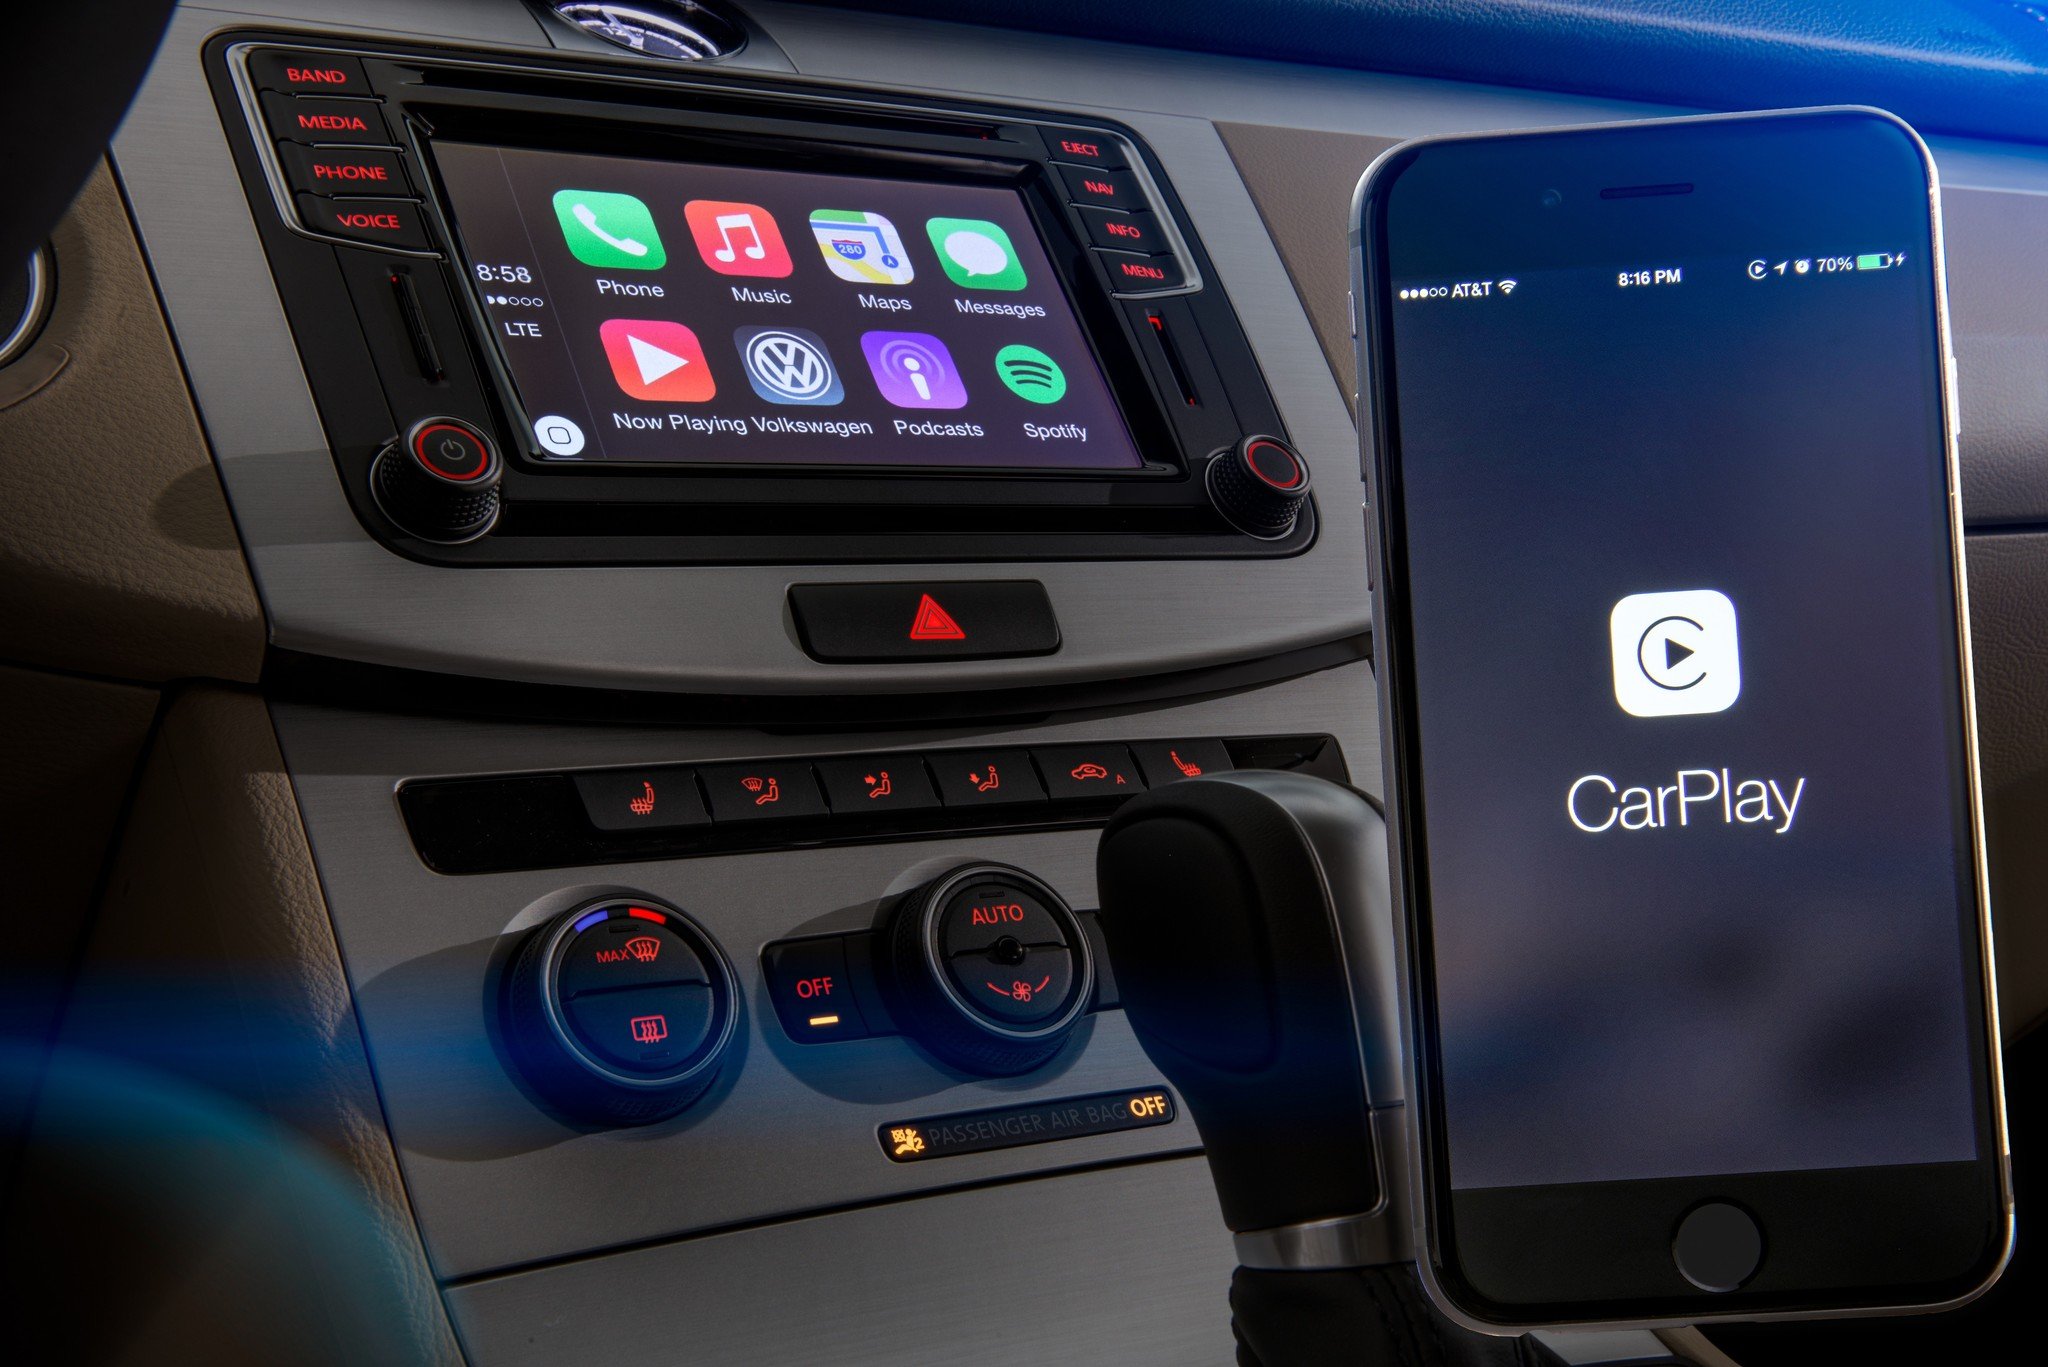 Volkswagen announces CarPlay support for its 2016 lineup